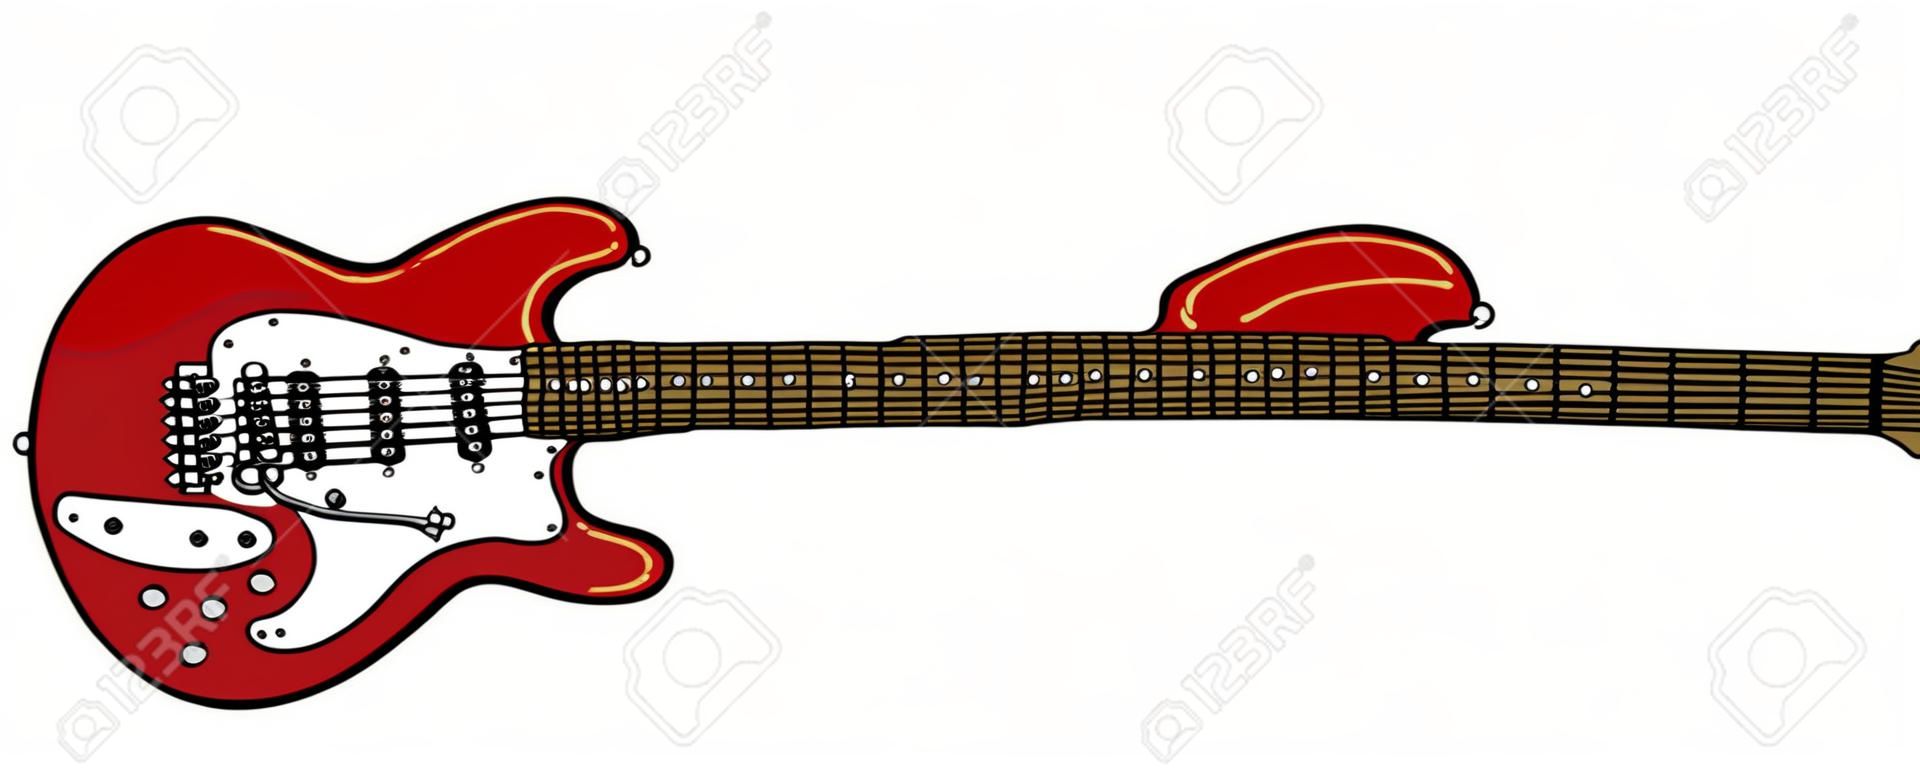 The vectorized hand drawing of a classic red electric guitar